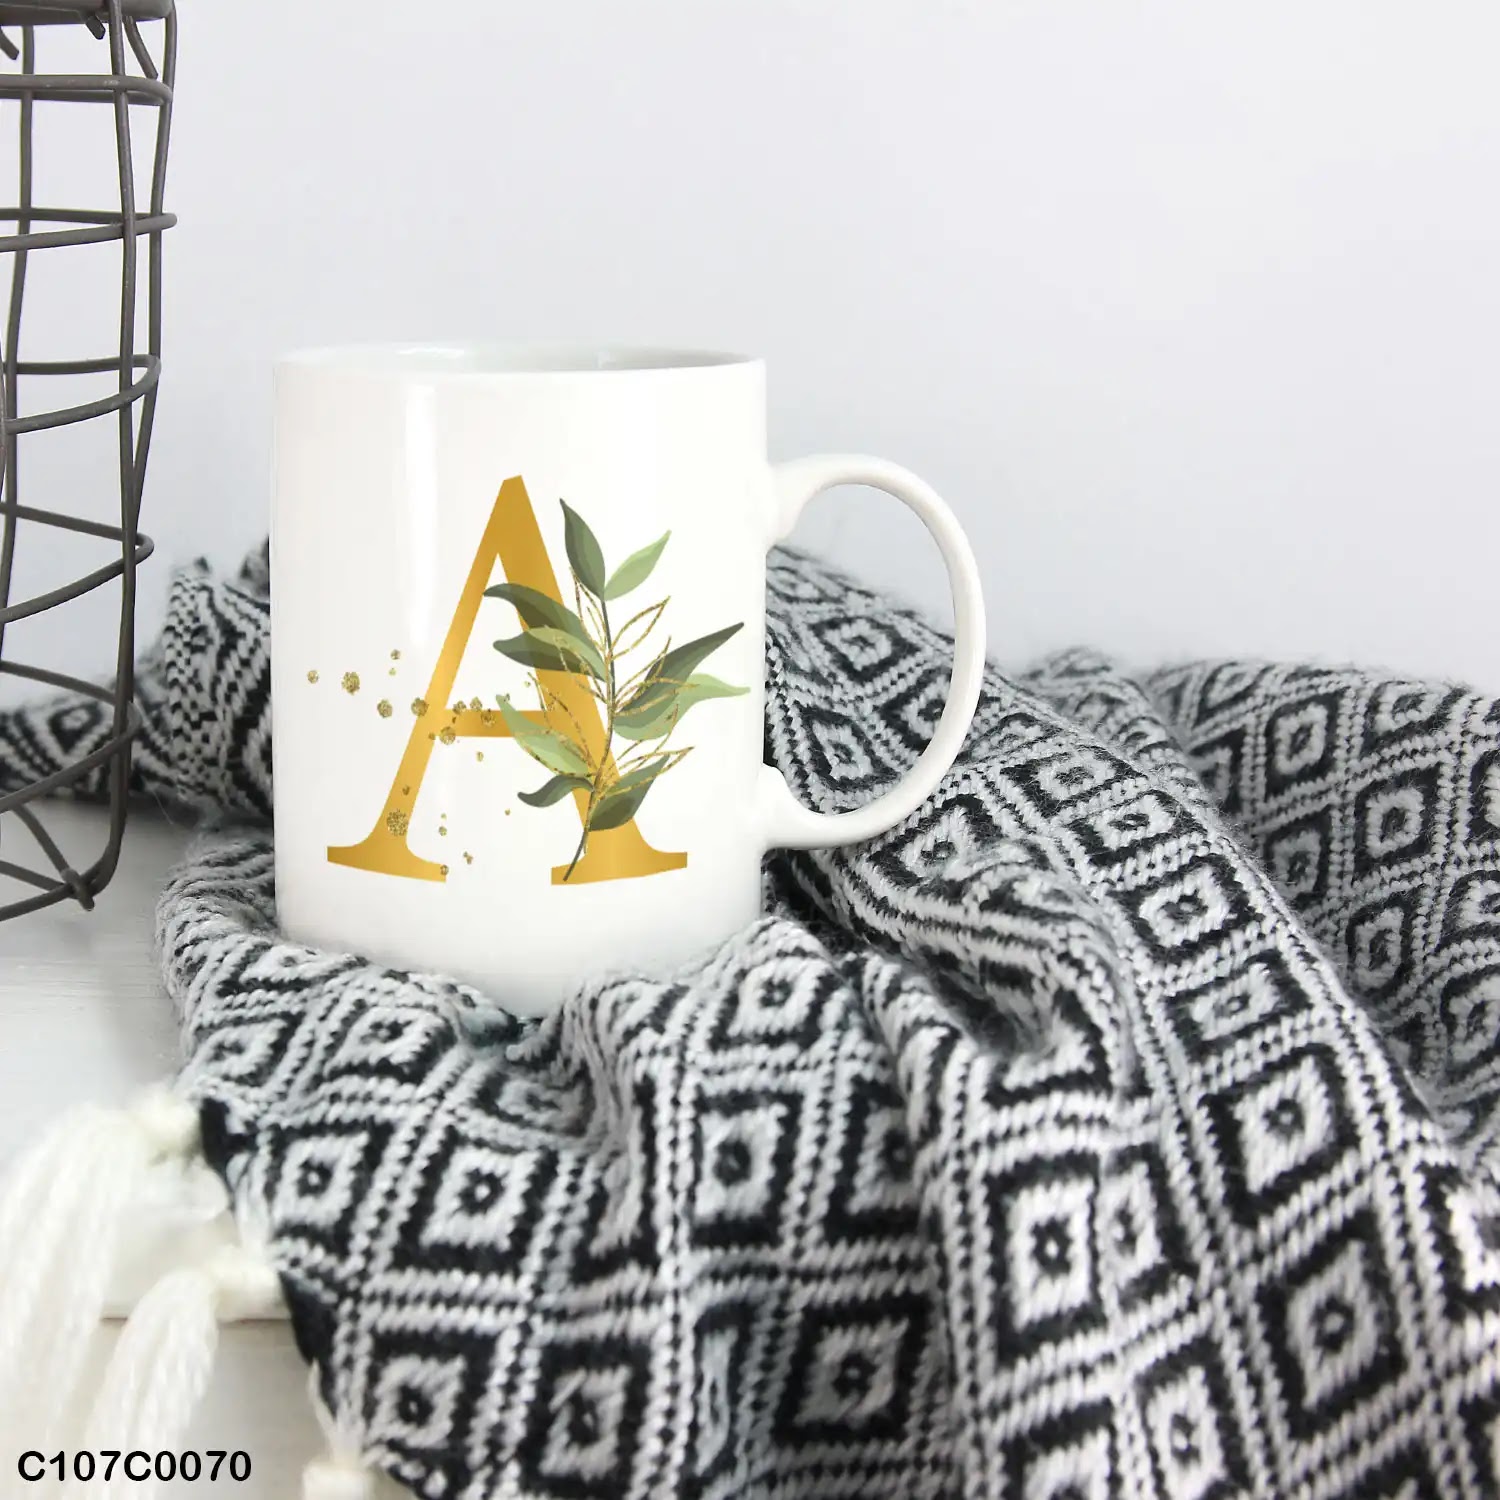 A white mug (cup) printed with gold Letter "A" and small green branch